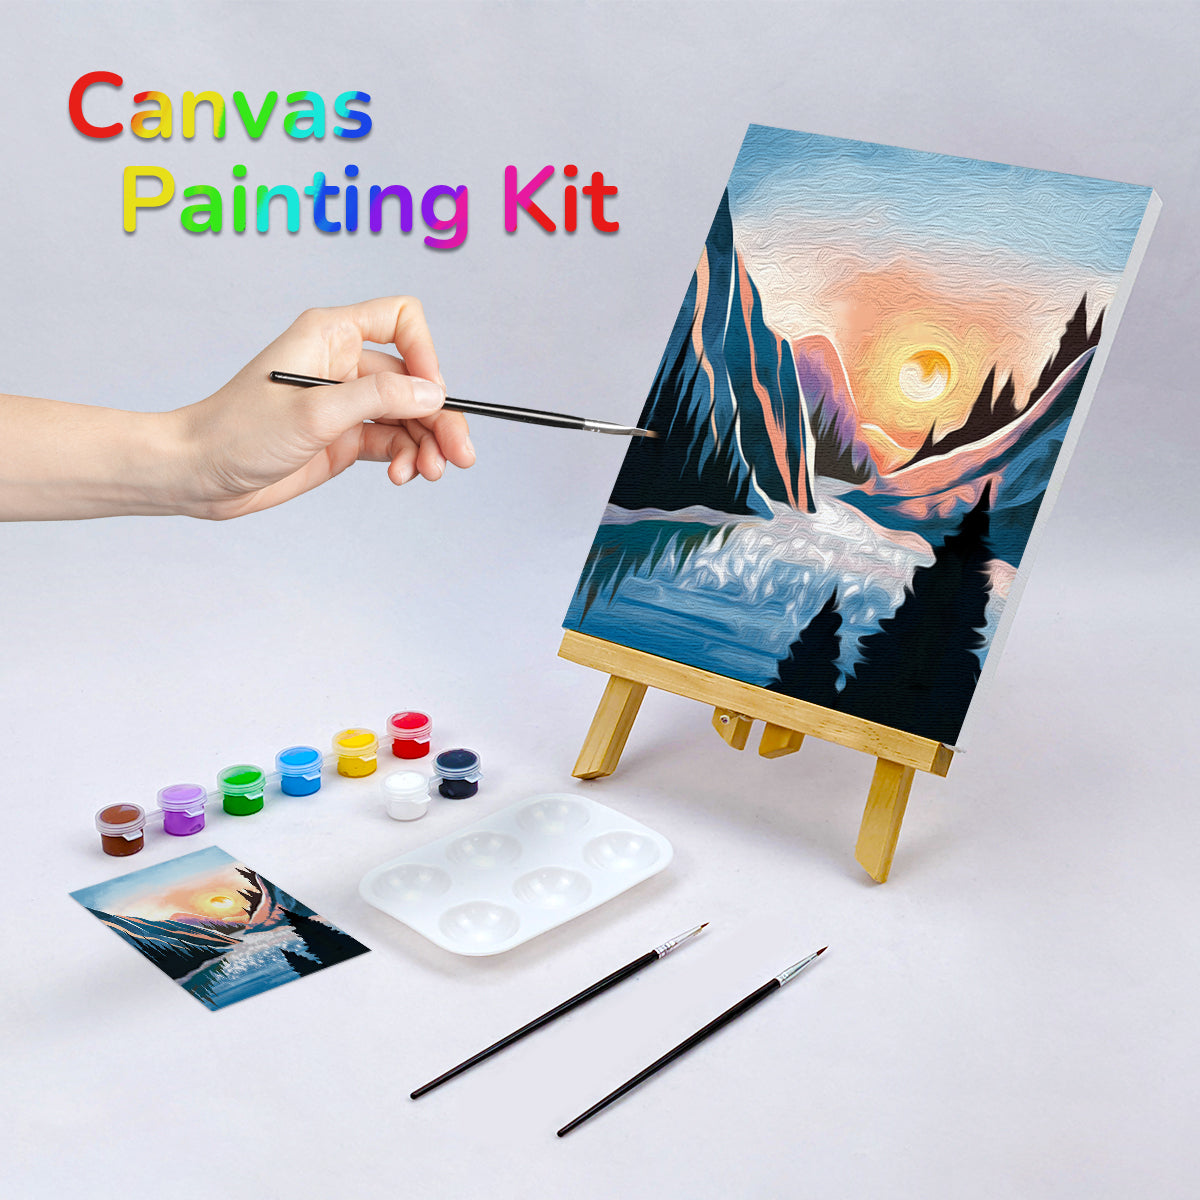  VOCHIC 4 Pack Canvas Painting Kit Pre Drawn Canvas for Painting  for Adults Party Kits Paint and Sip Party Supplies 8x10 Canvas to Paint  Paint Art Set